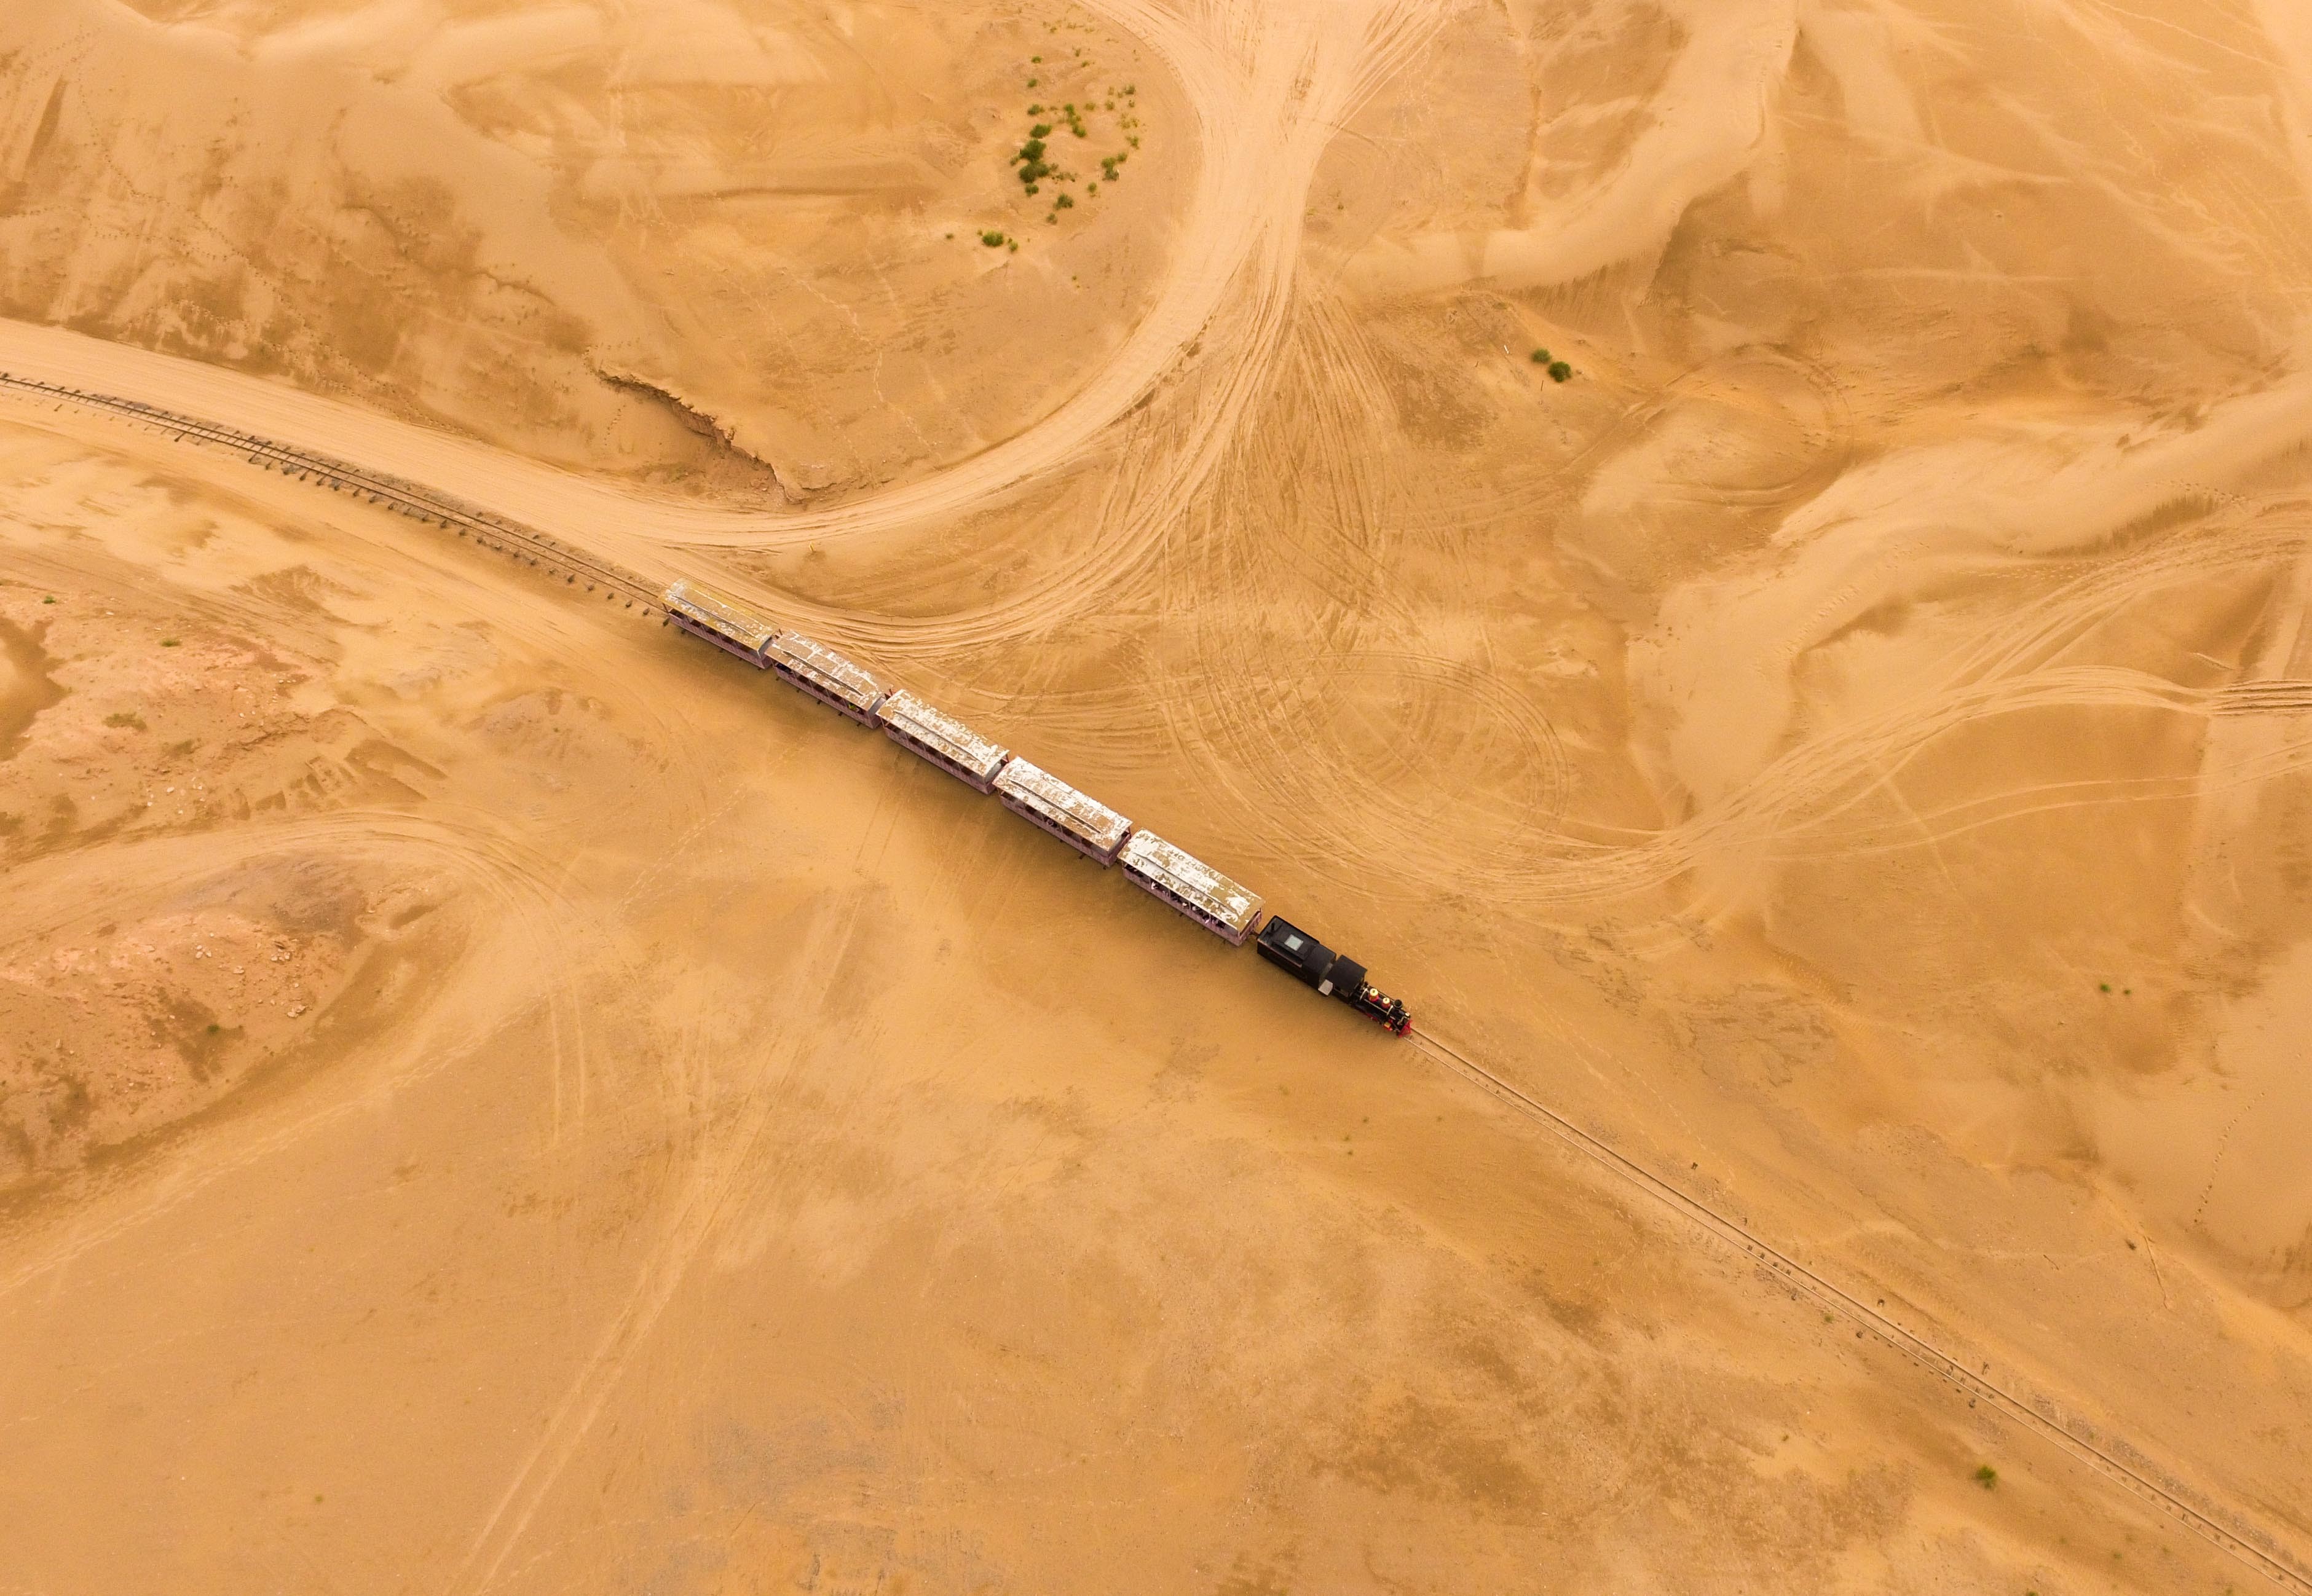 A train runs through the Whistling Dune Bay in Dalad Qi in Ordos, in northern China's Inner Mongolia Autonomous Region. Located to the east of Kubuqi Desert, the Whistling Dune Bay was developed as a tourist destination since 1984. After years of improvement, it became a landmark for tourism industry of the Inner Mongolia Autonomous Region. Photo: Xinhua